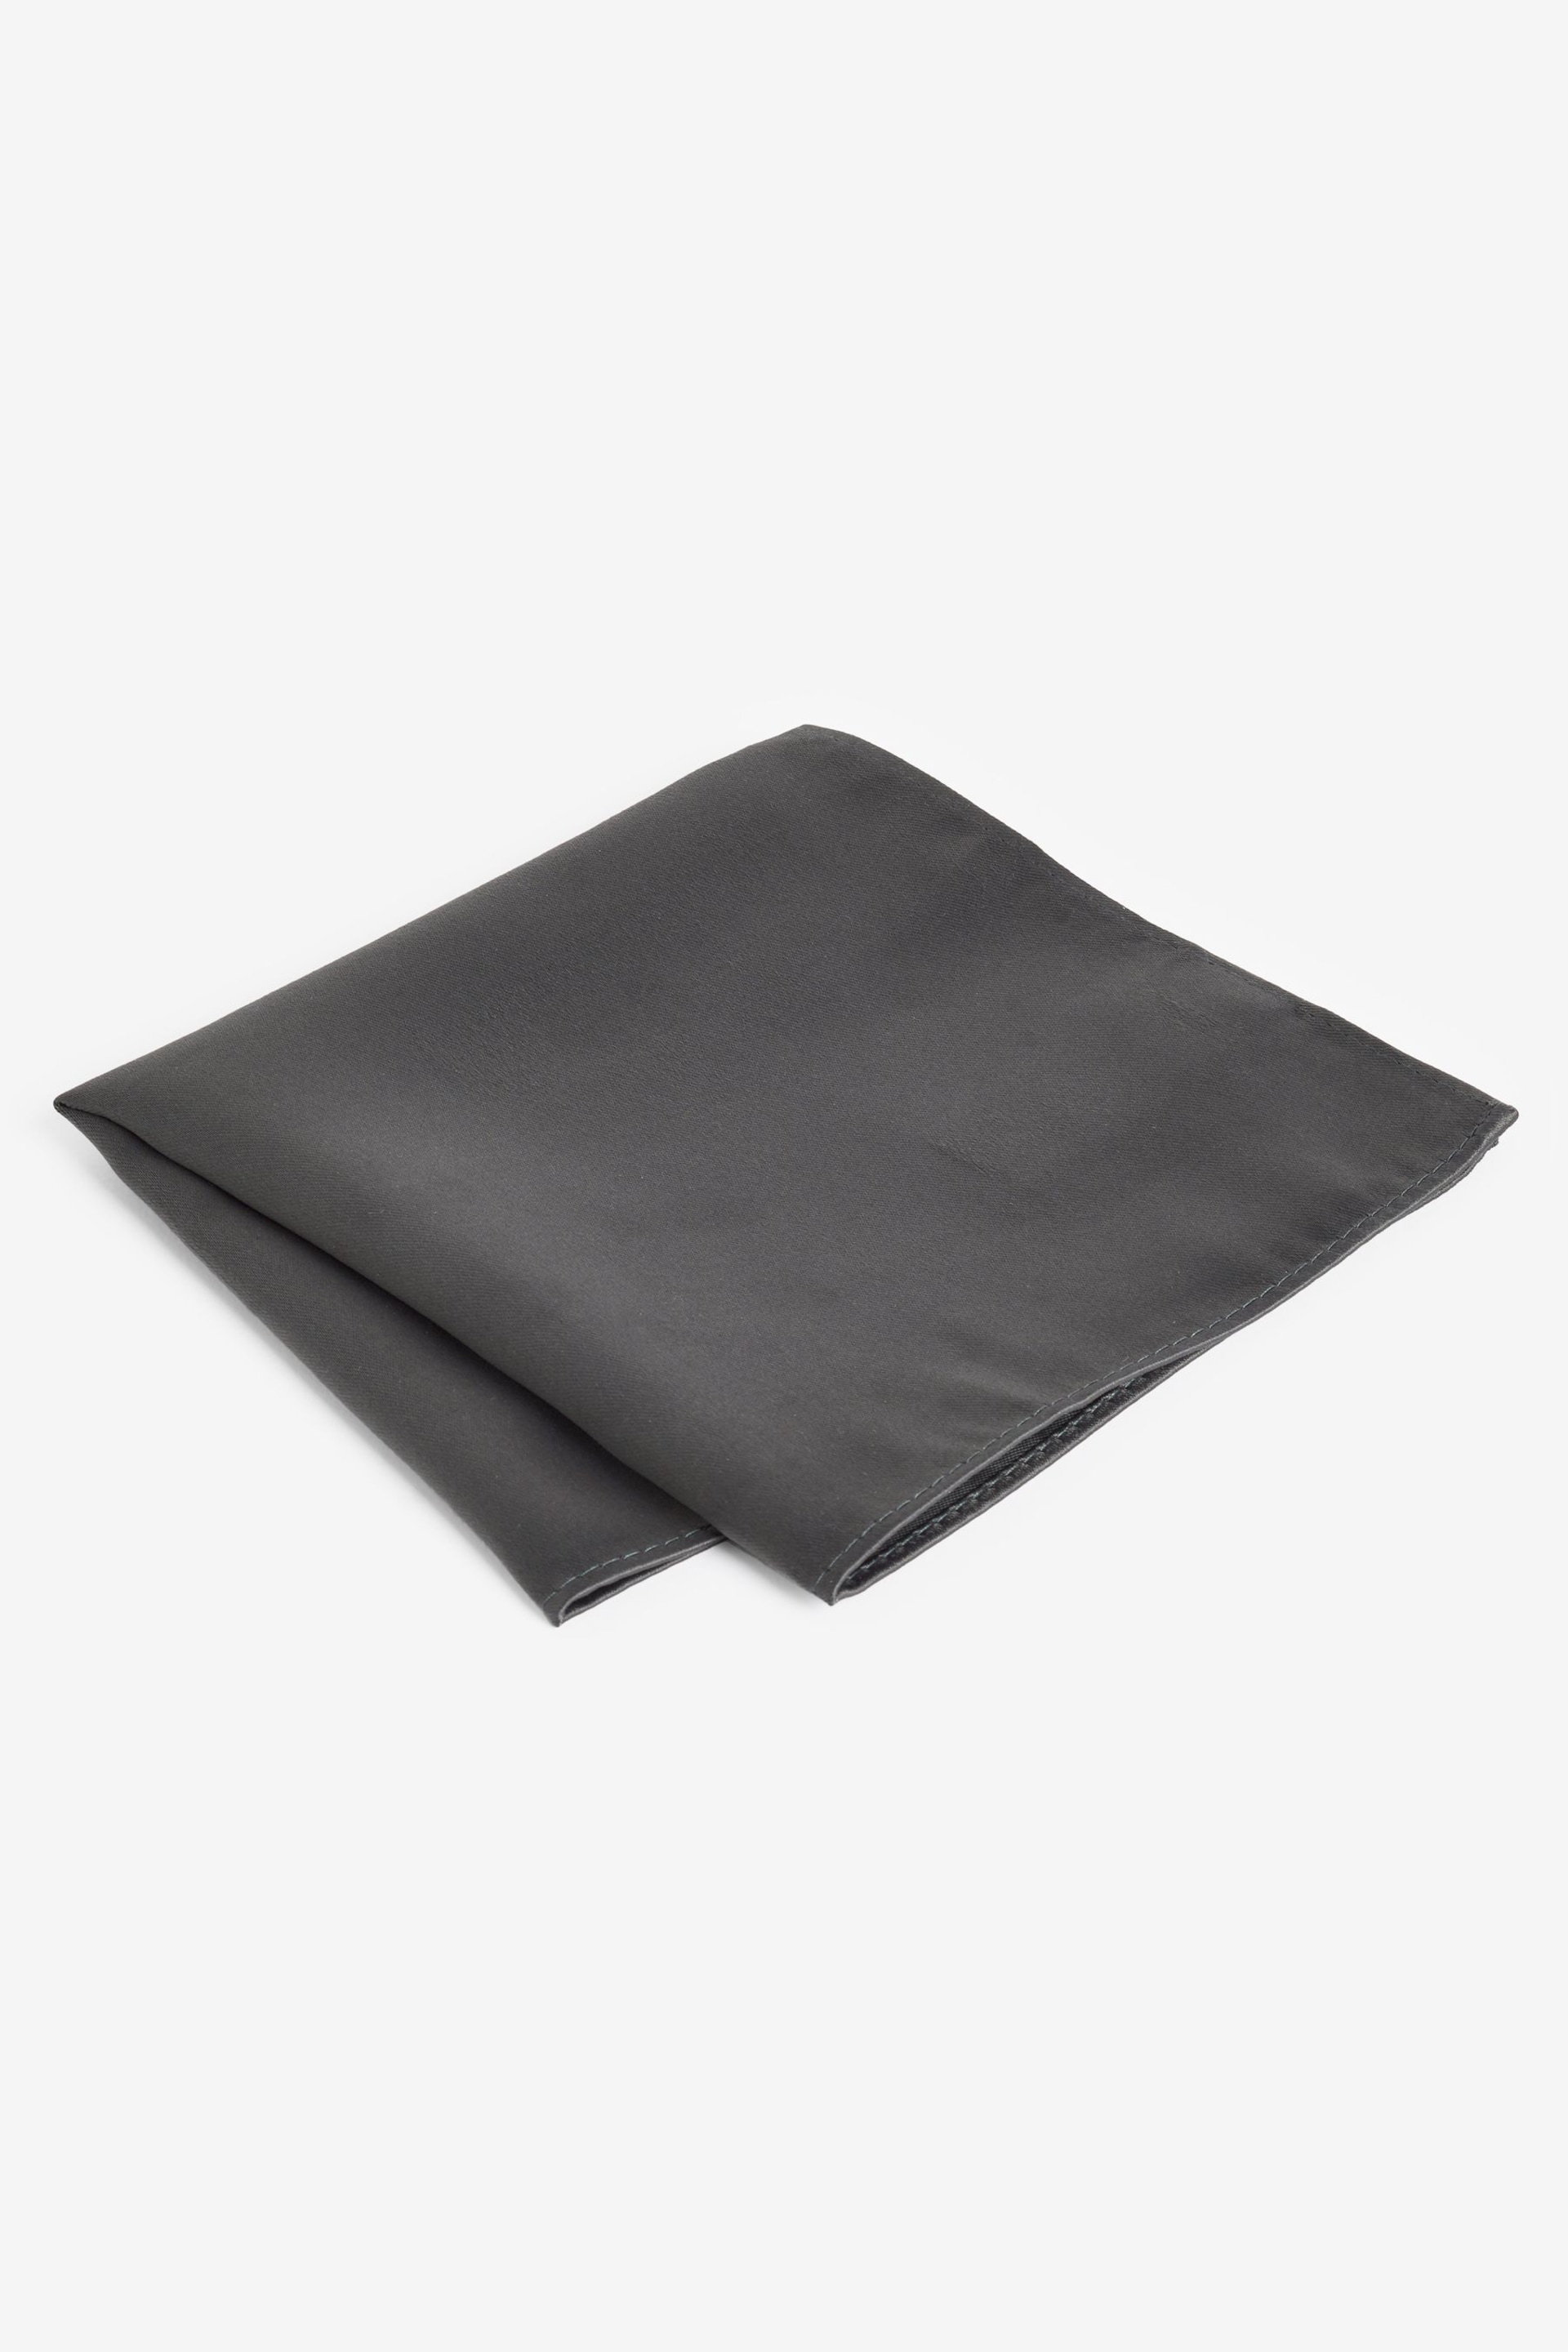 Charcoal Grey Satin Tie And Pocket Square Set - Image 4 of 5